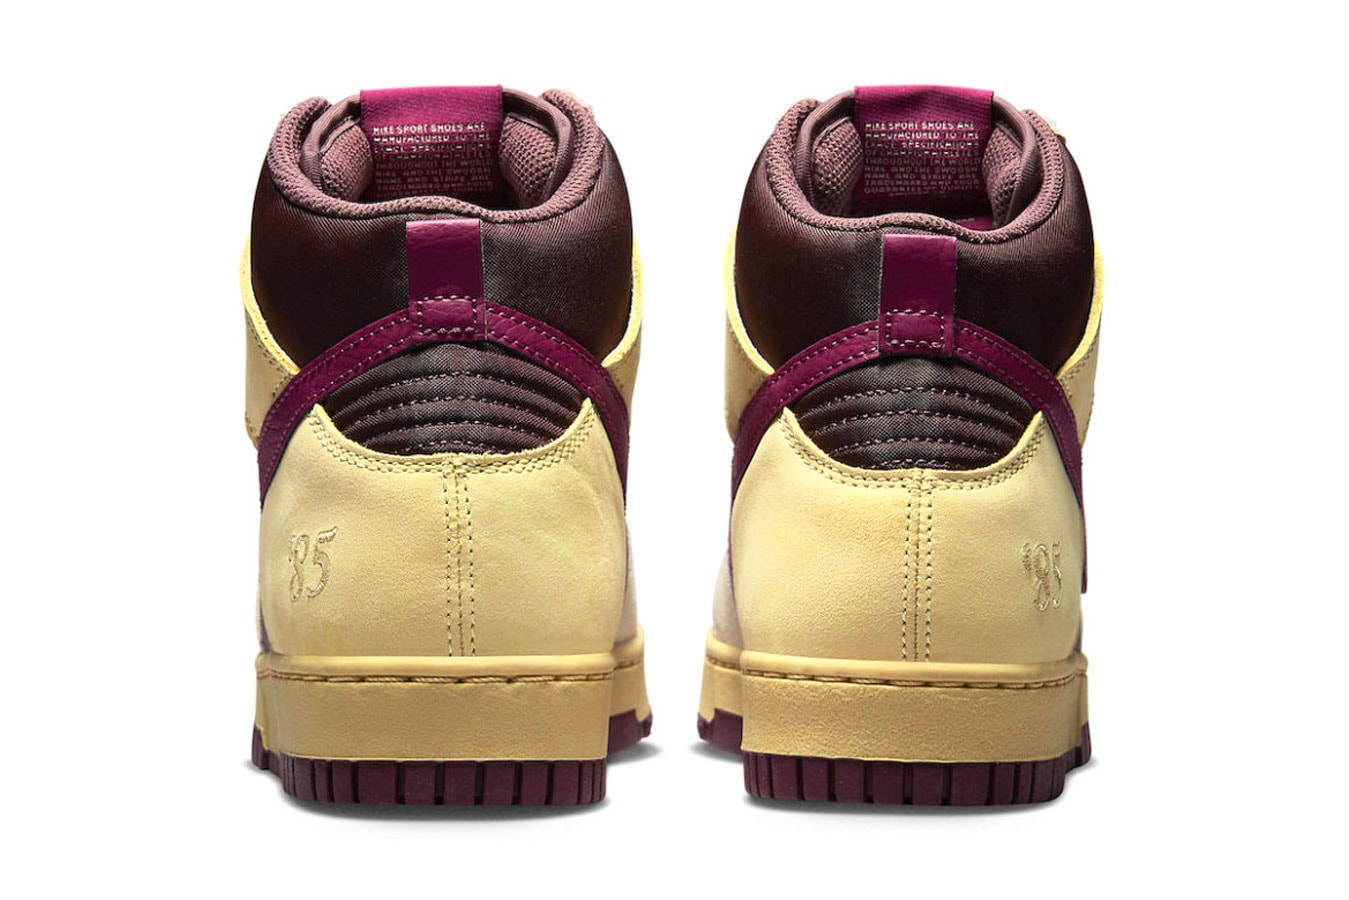 Nike Dunkd High 1985 valentines day 85 alabaster rosewood earth night maroon FD0794 700 140 usd release info date pricec